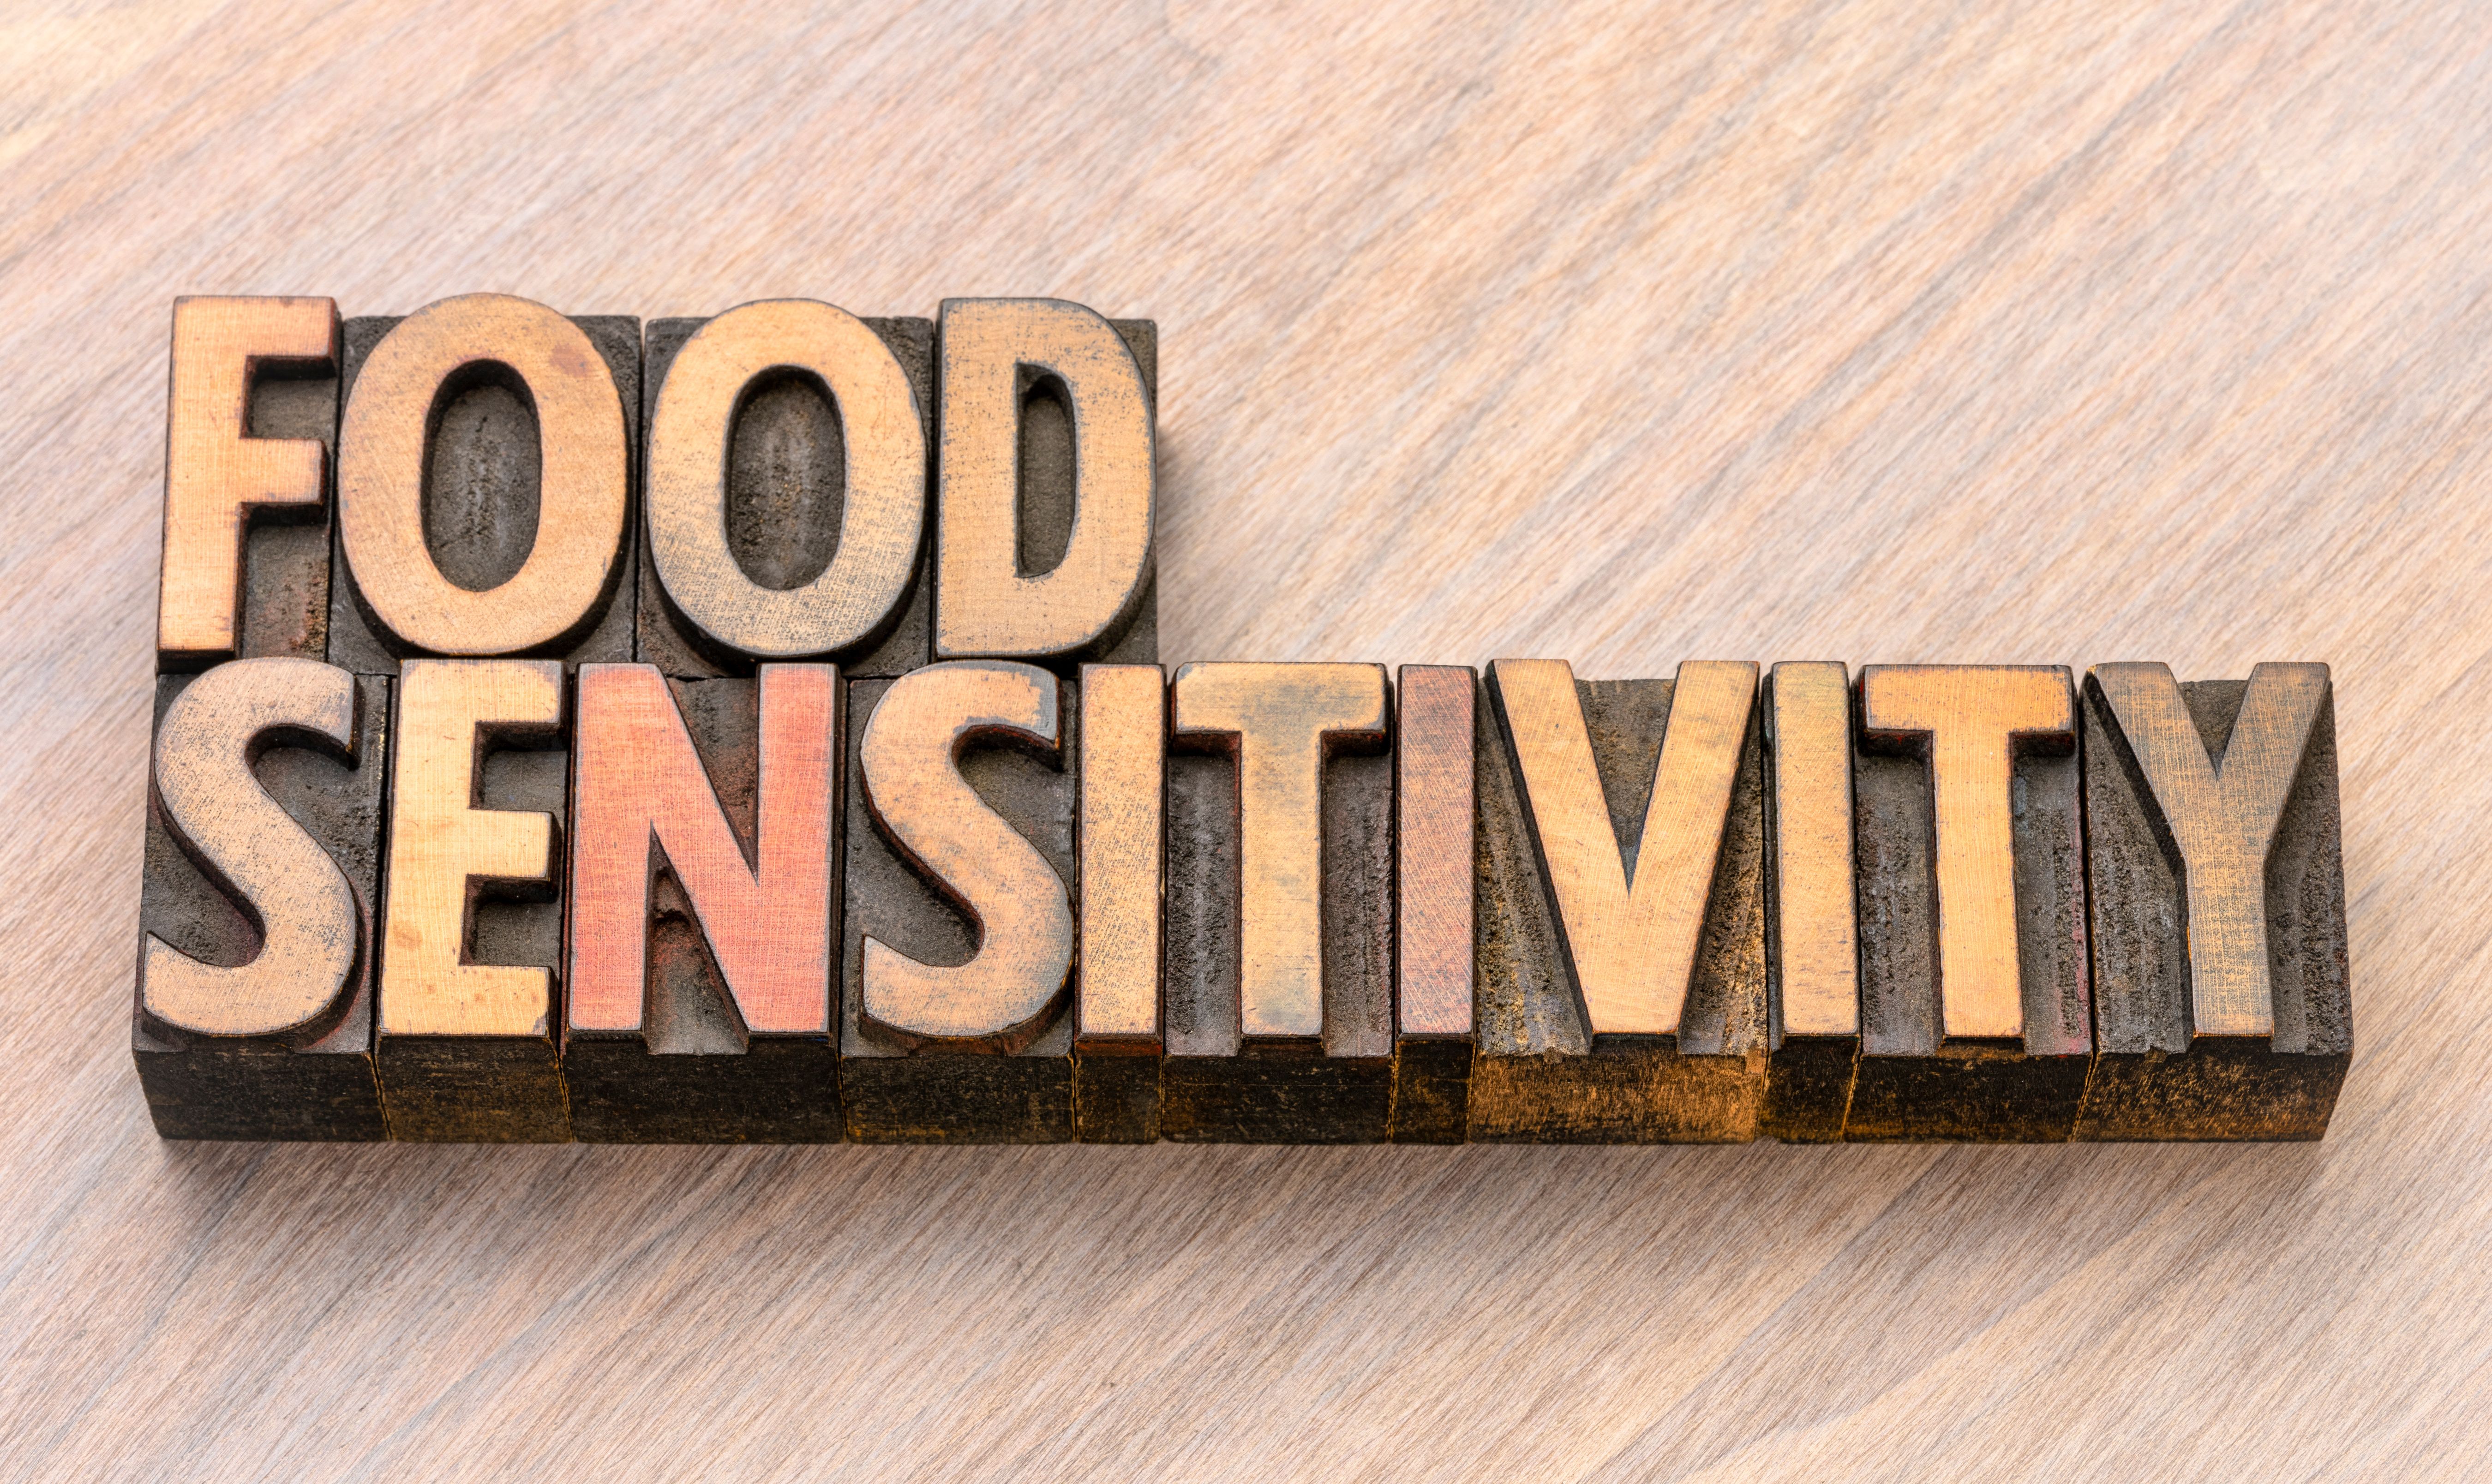 Autistic individuals can be sensitive to strong flavours, smell, or sight of different foods